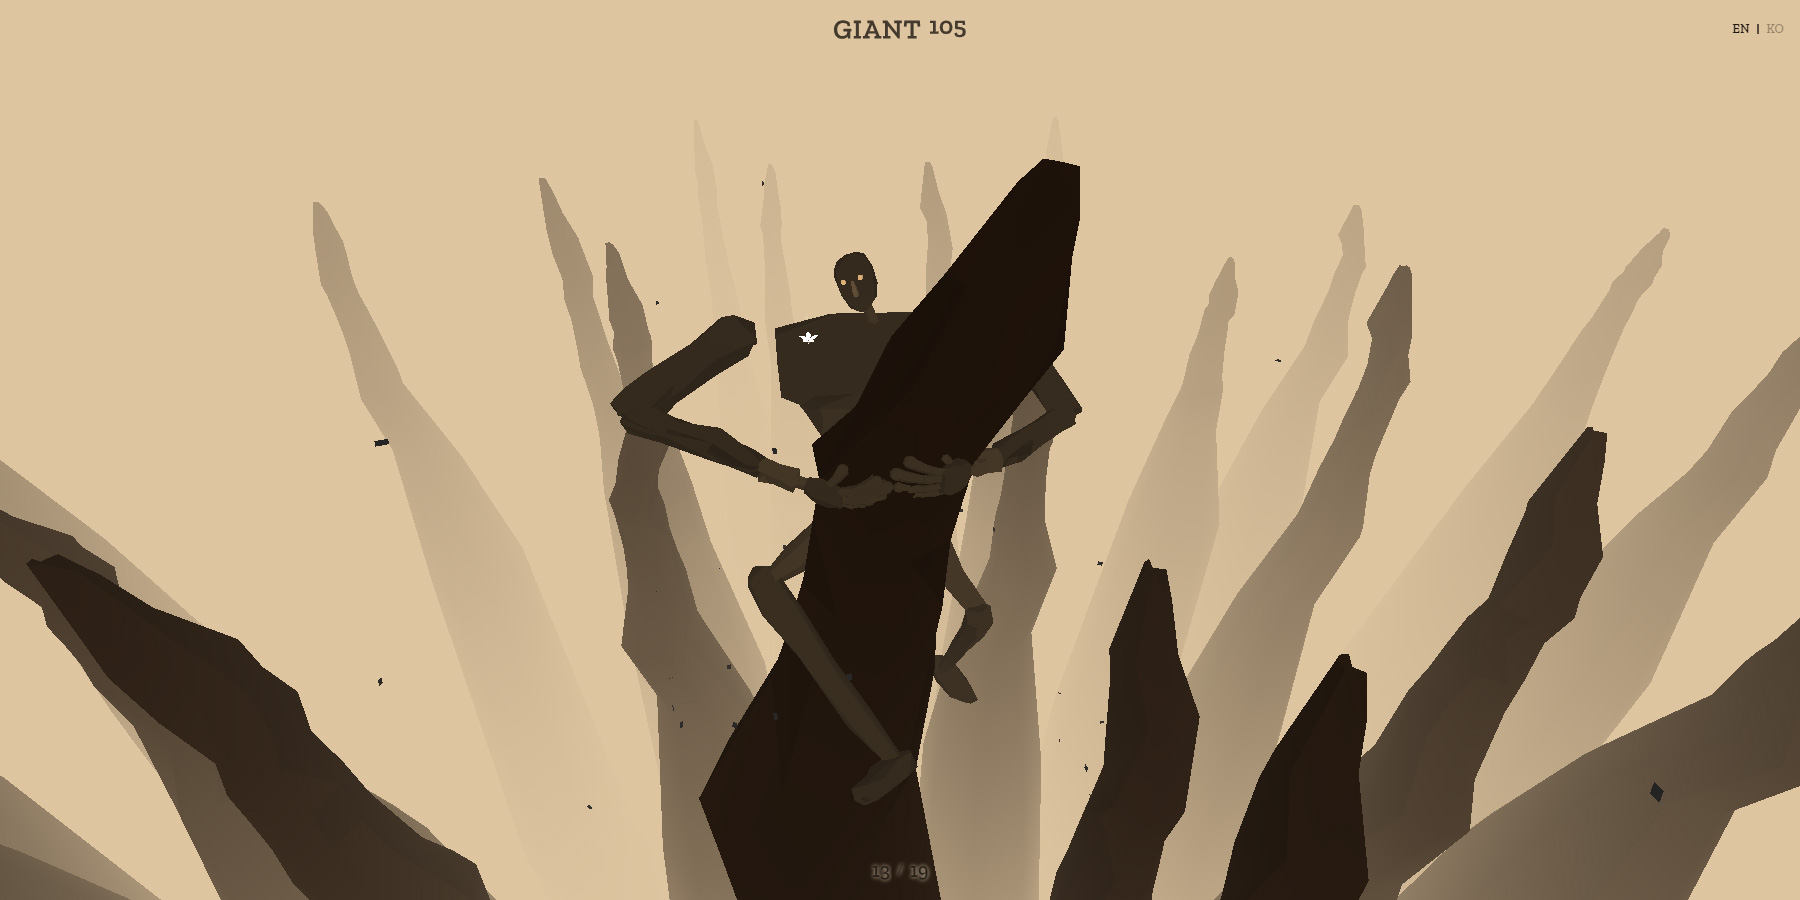 GIANT 105 - Website of the Month